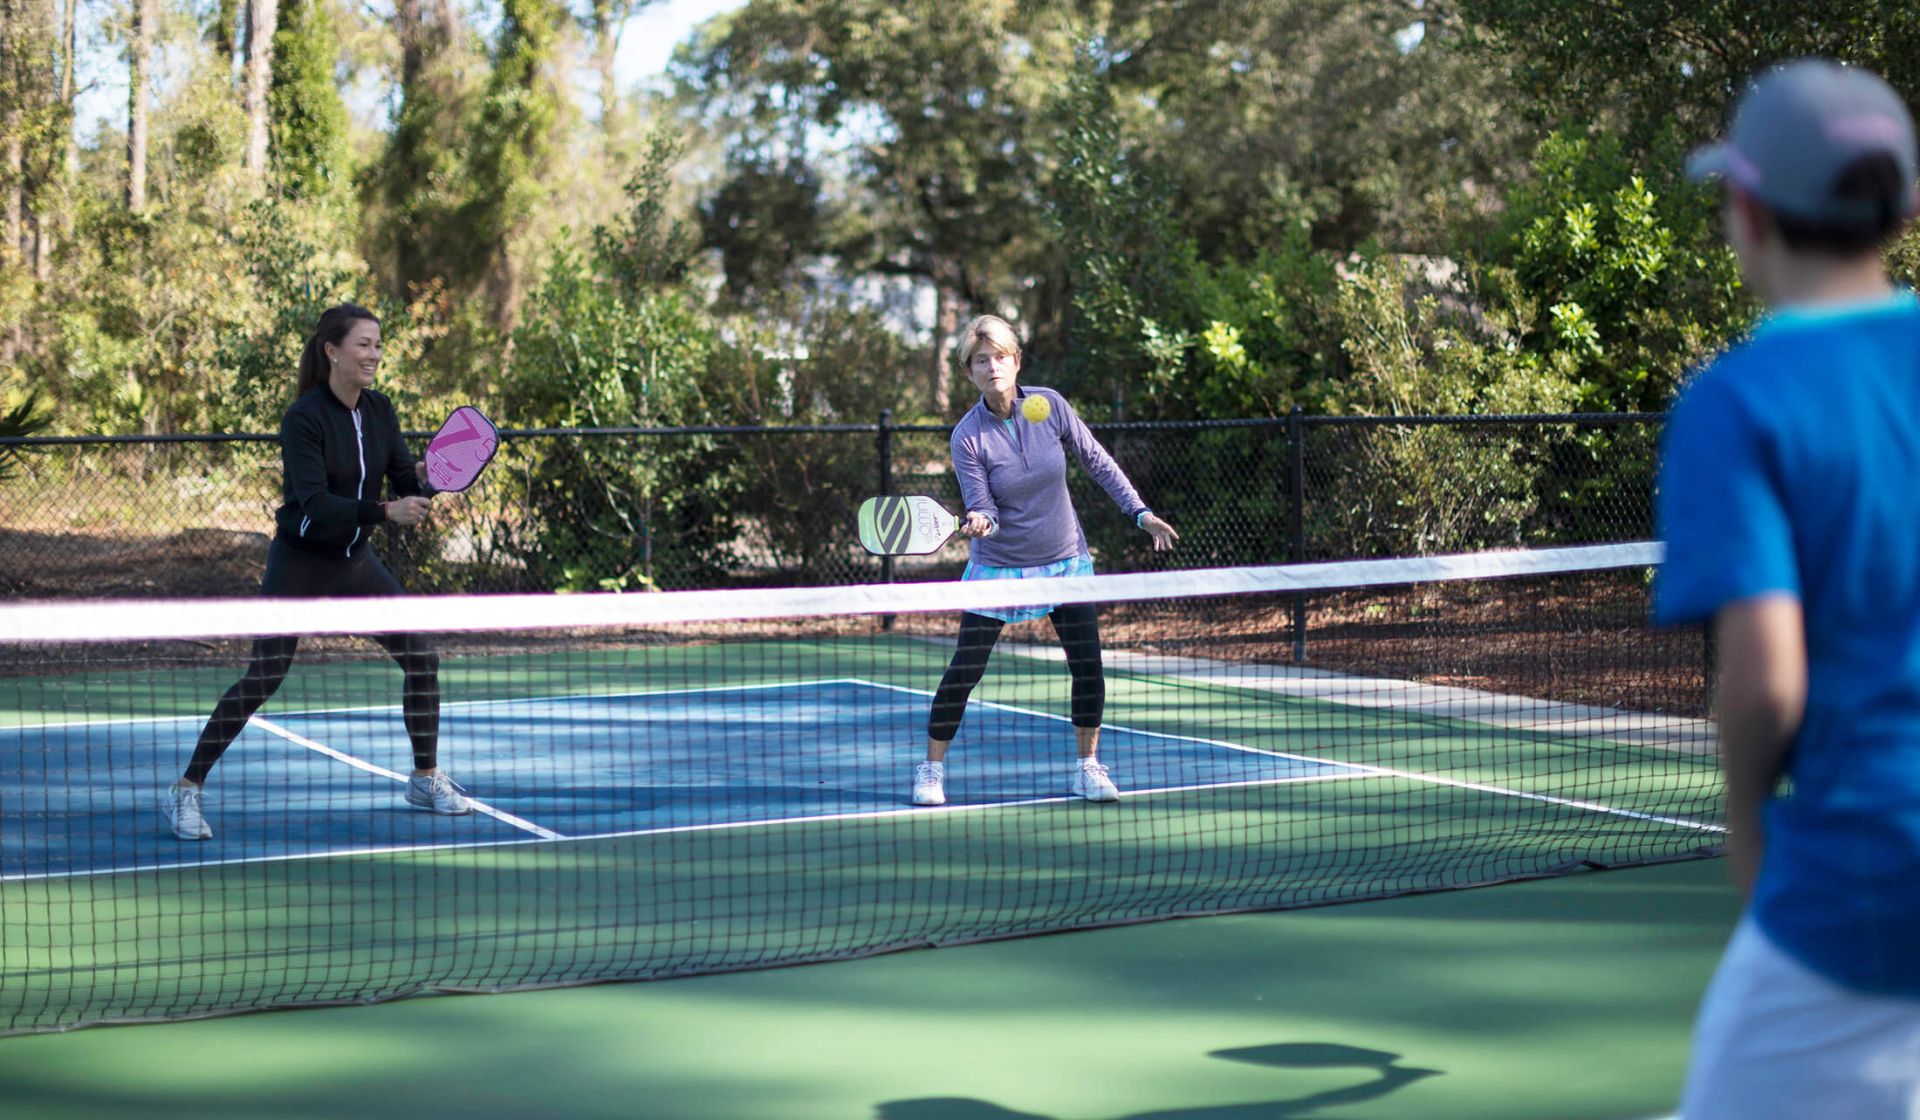 Play with the Pickleball Pro